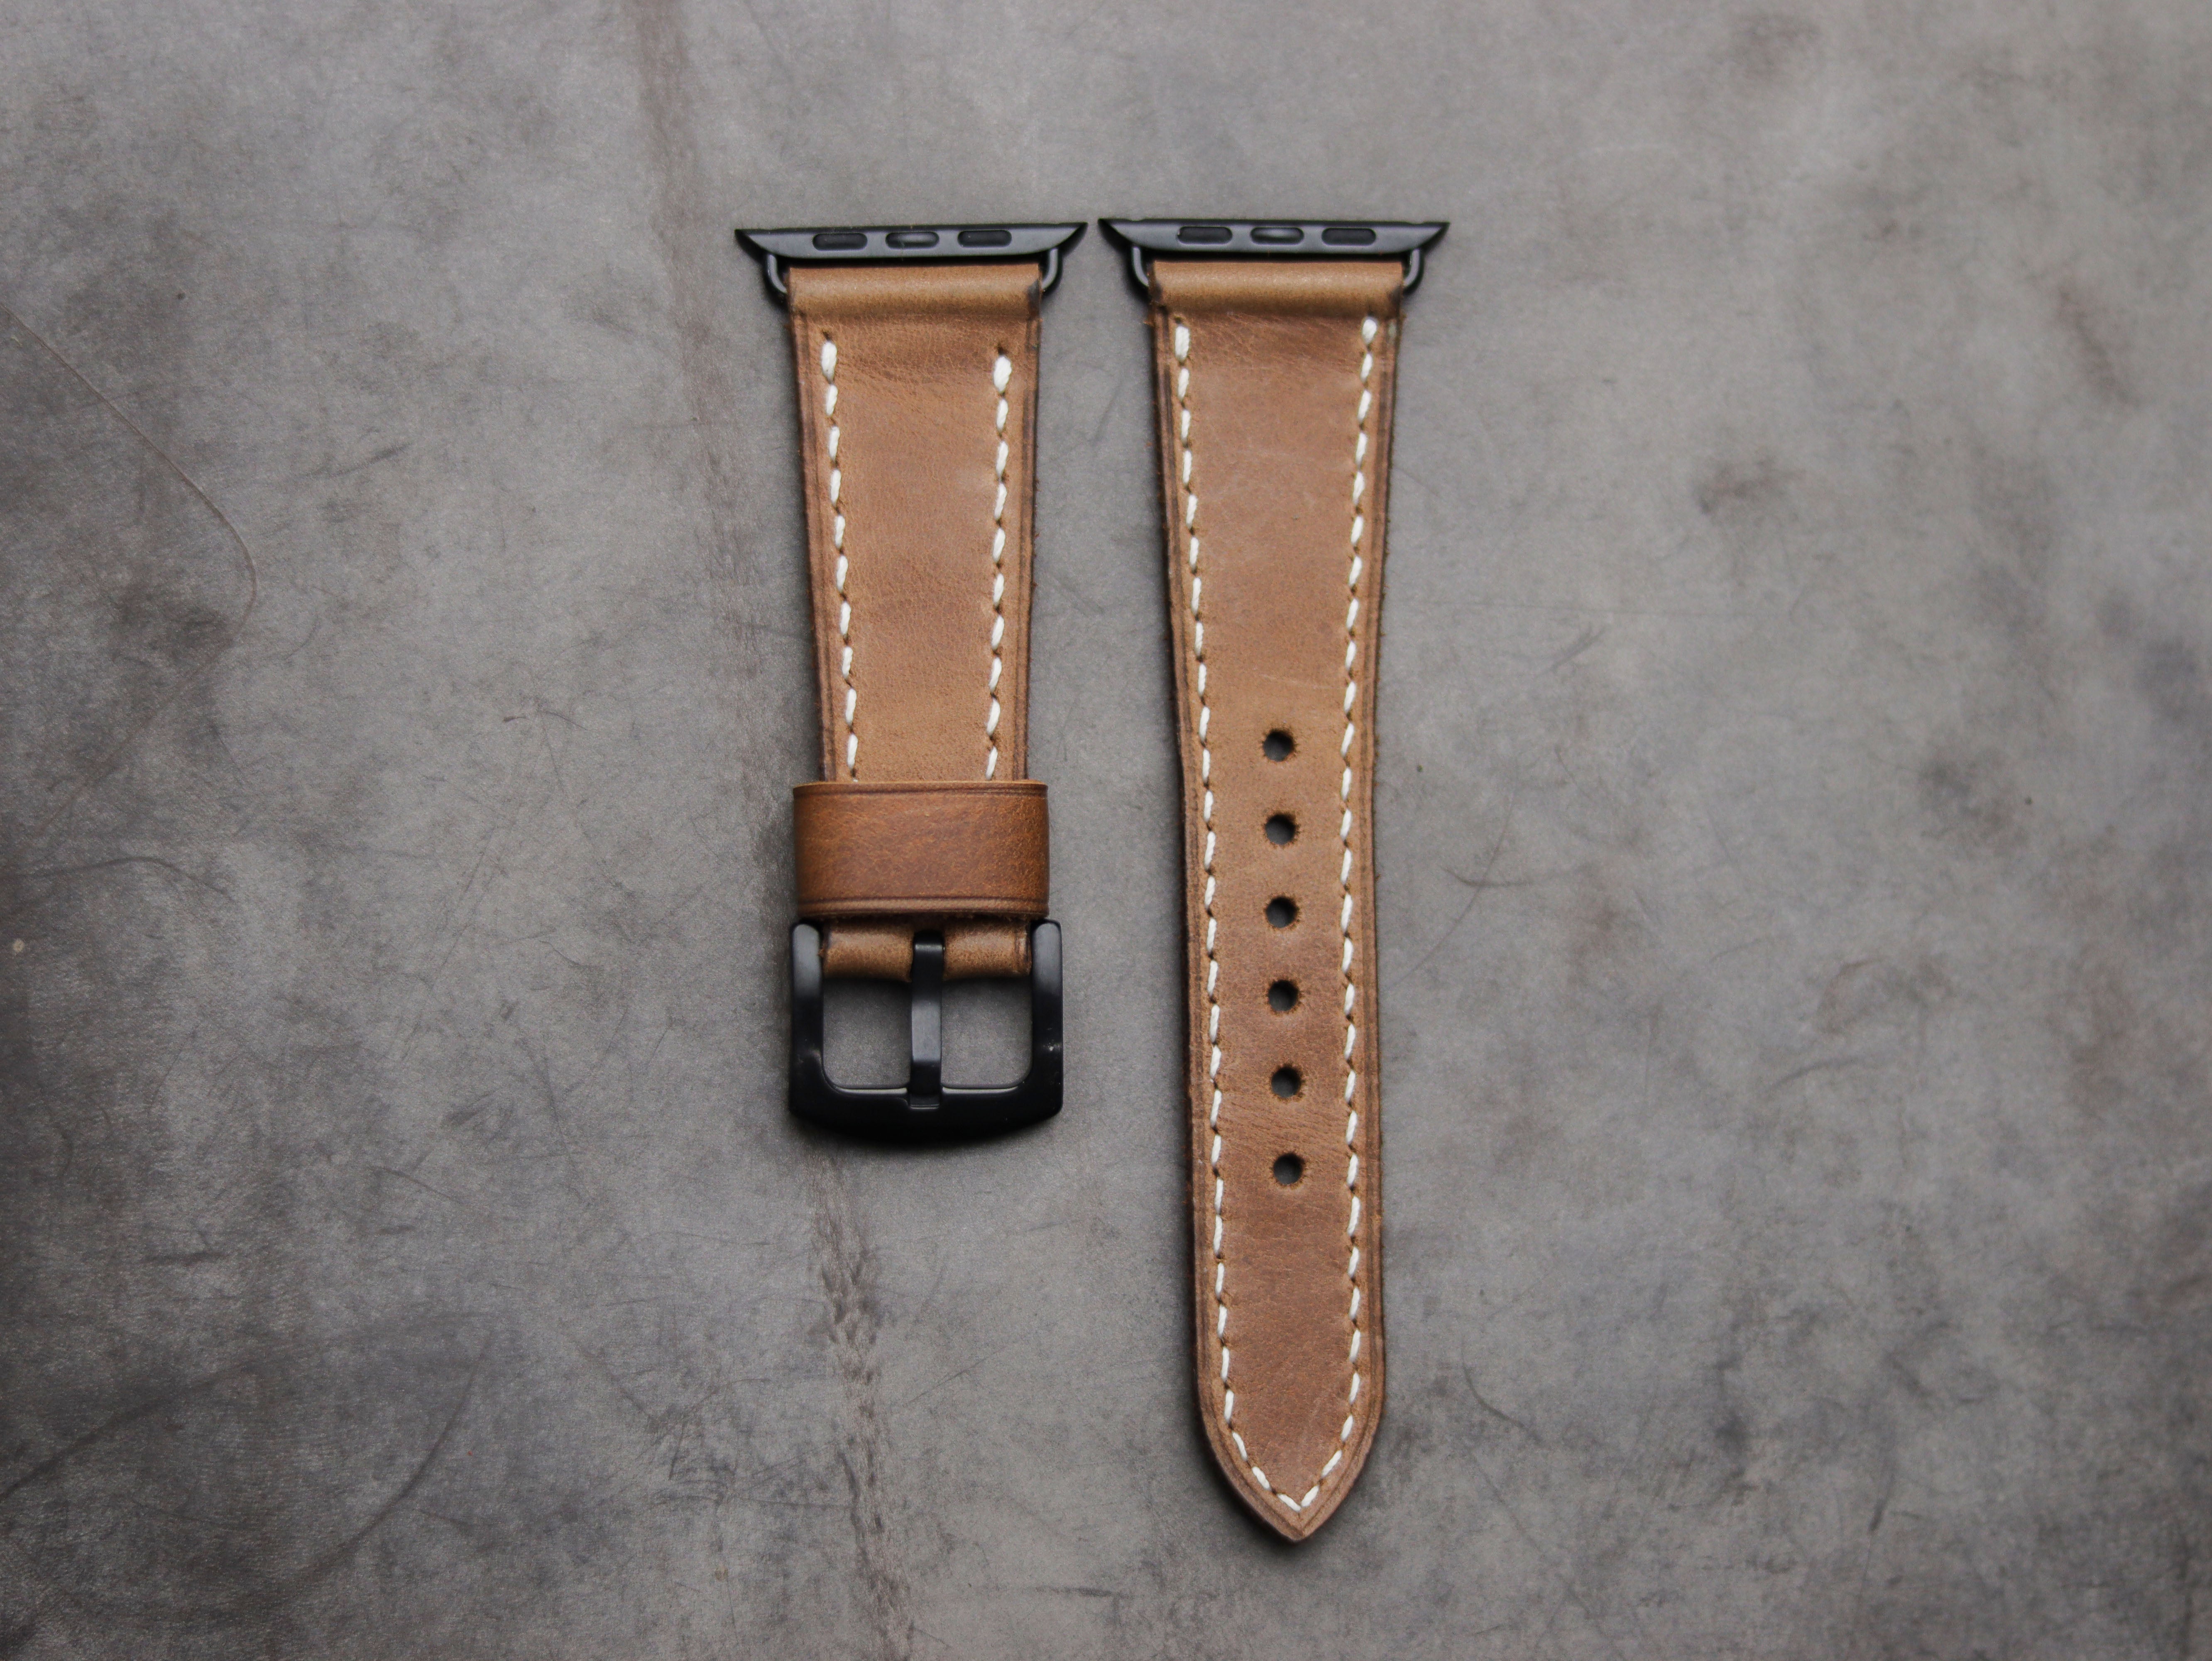 CARAMEL BROWN LEATHER - APPLE WATCH STRAPS HAND-CRAFTED